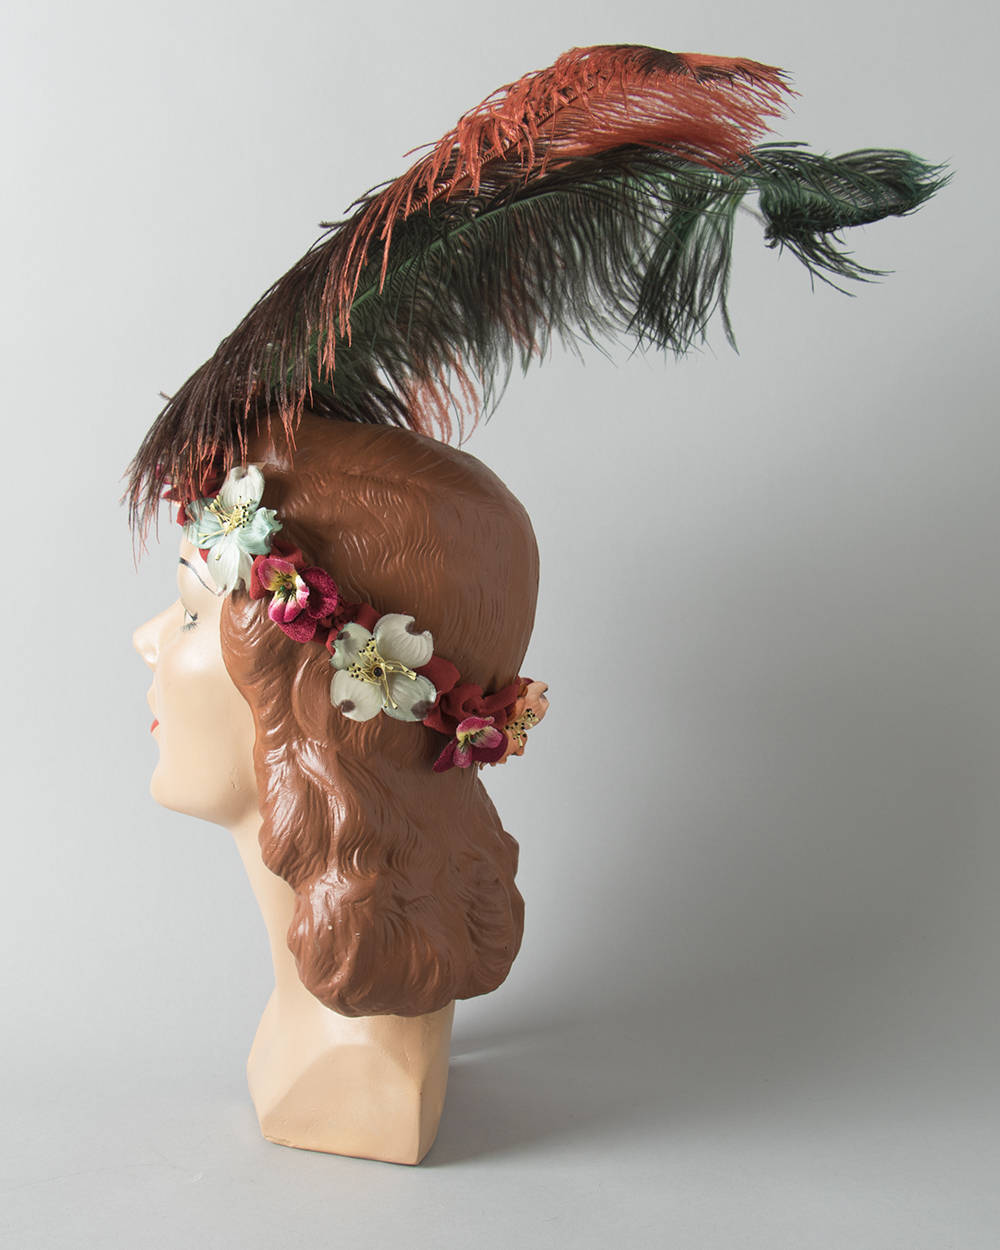 Handmade 1920s Style Headdress | 20s Inspired Ostrich Feather Floral Headband Vintage Millinery Flowers Headpiece